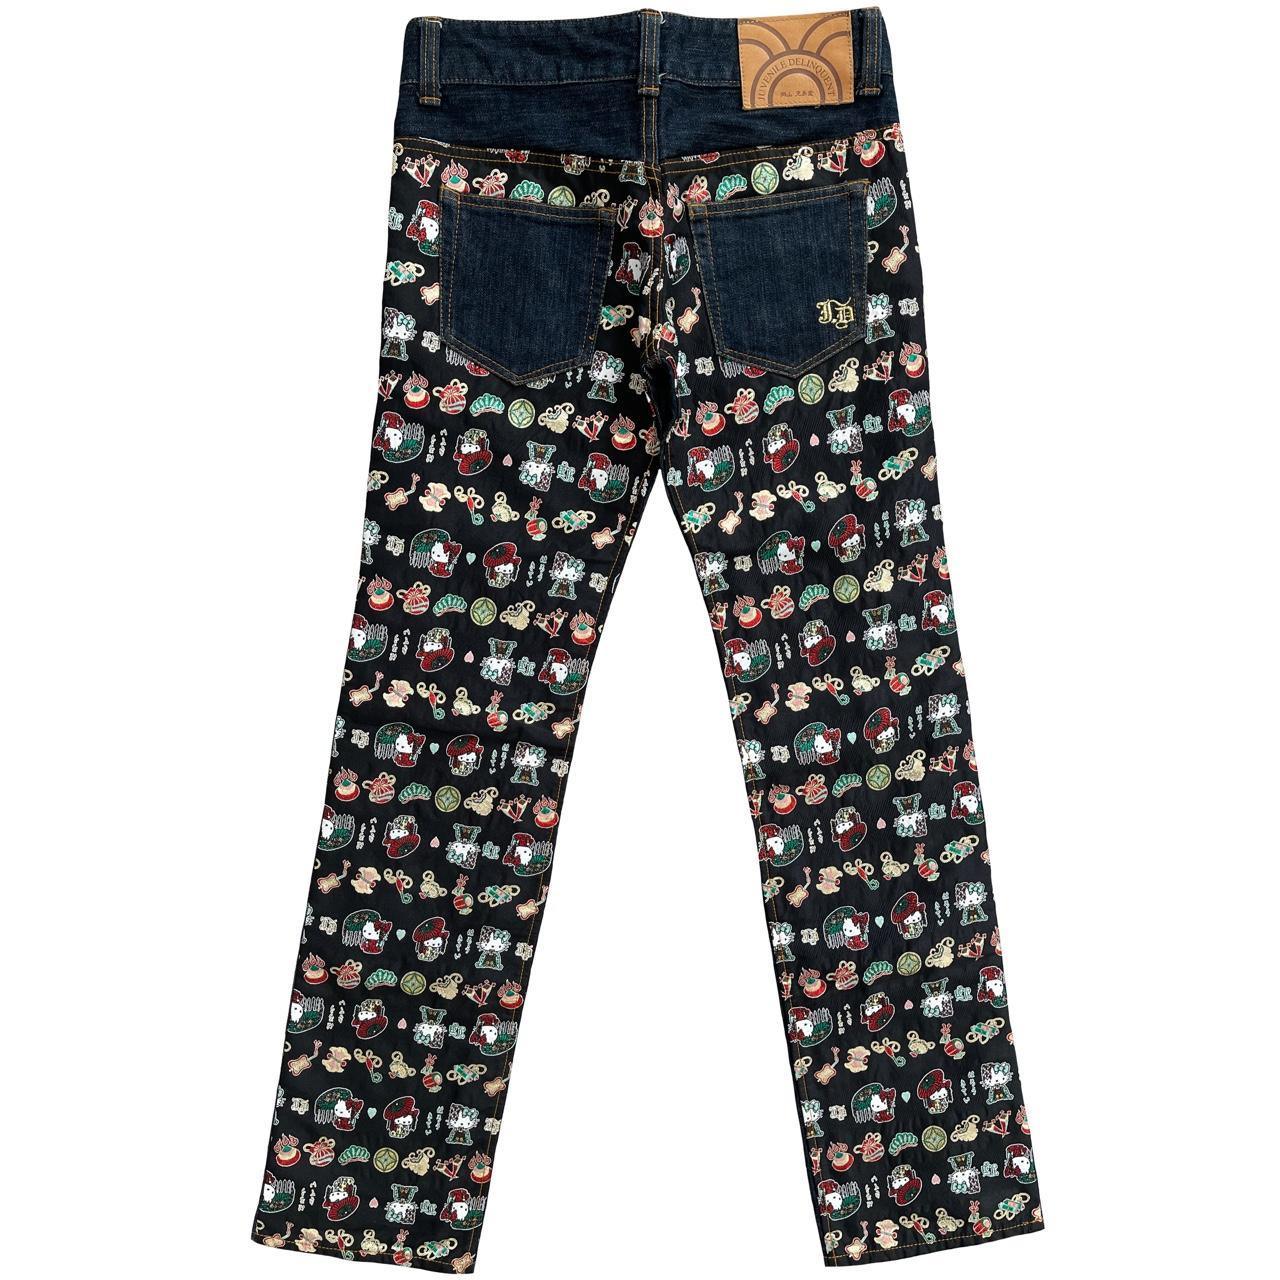 Juvenile x Hello Kitty Jeans - Known Source